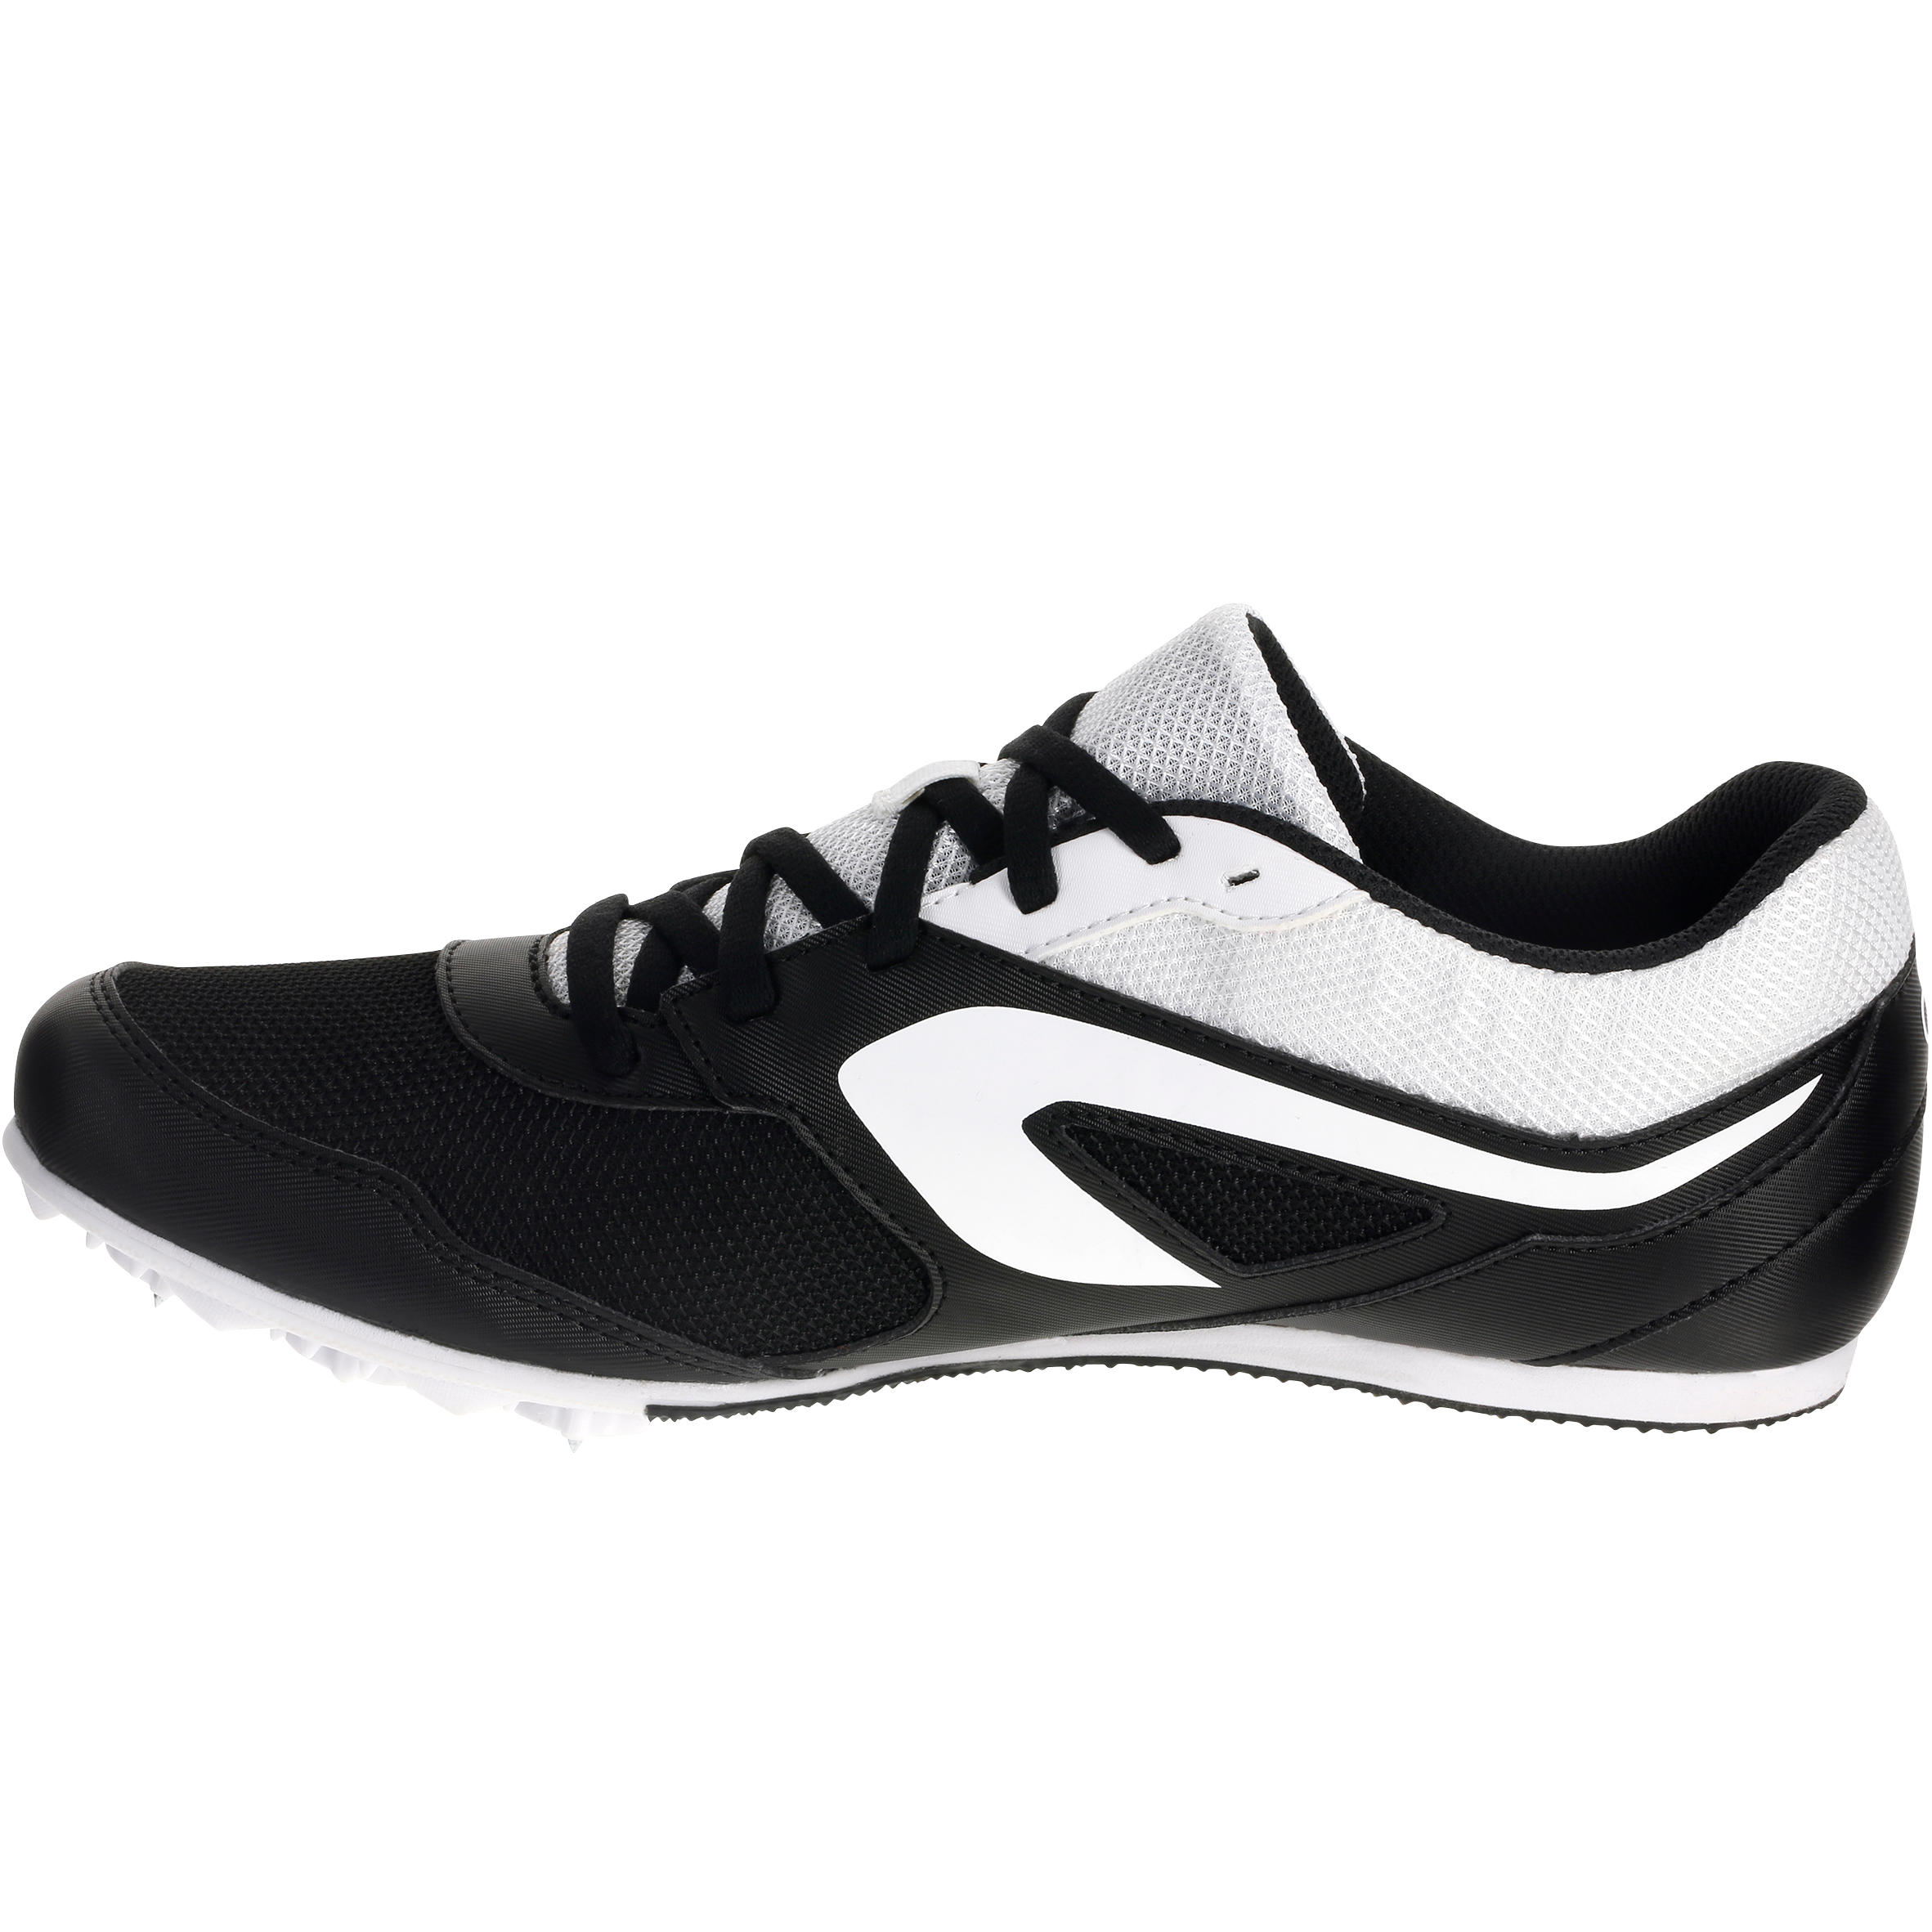 ATHLETICS TRAINERS WITH SPIKES BLACK WHITE 3/18